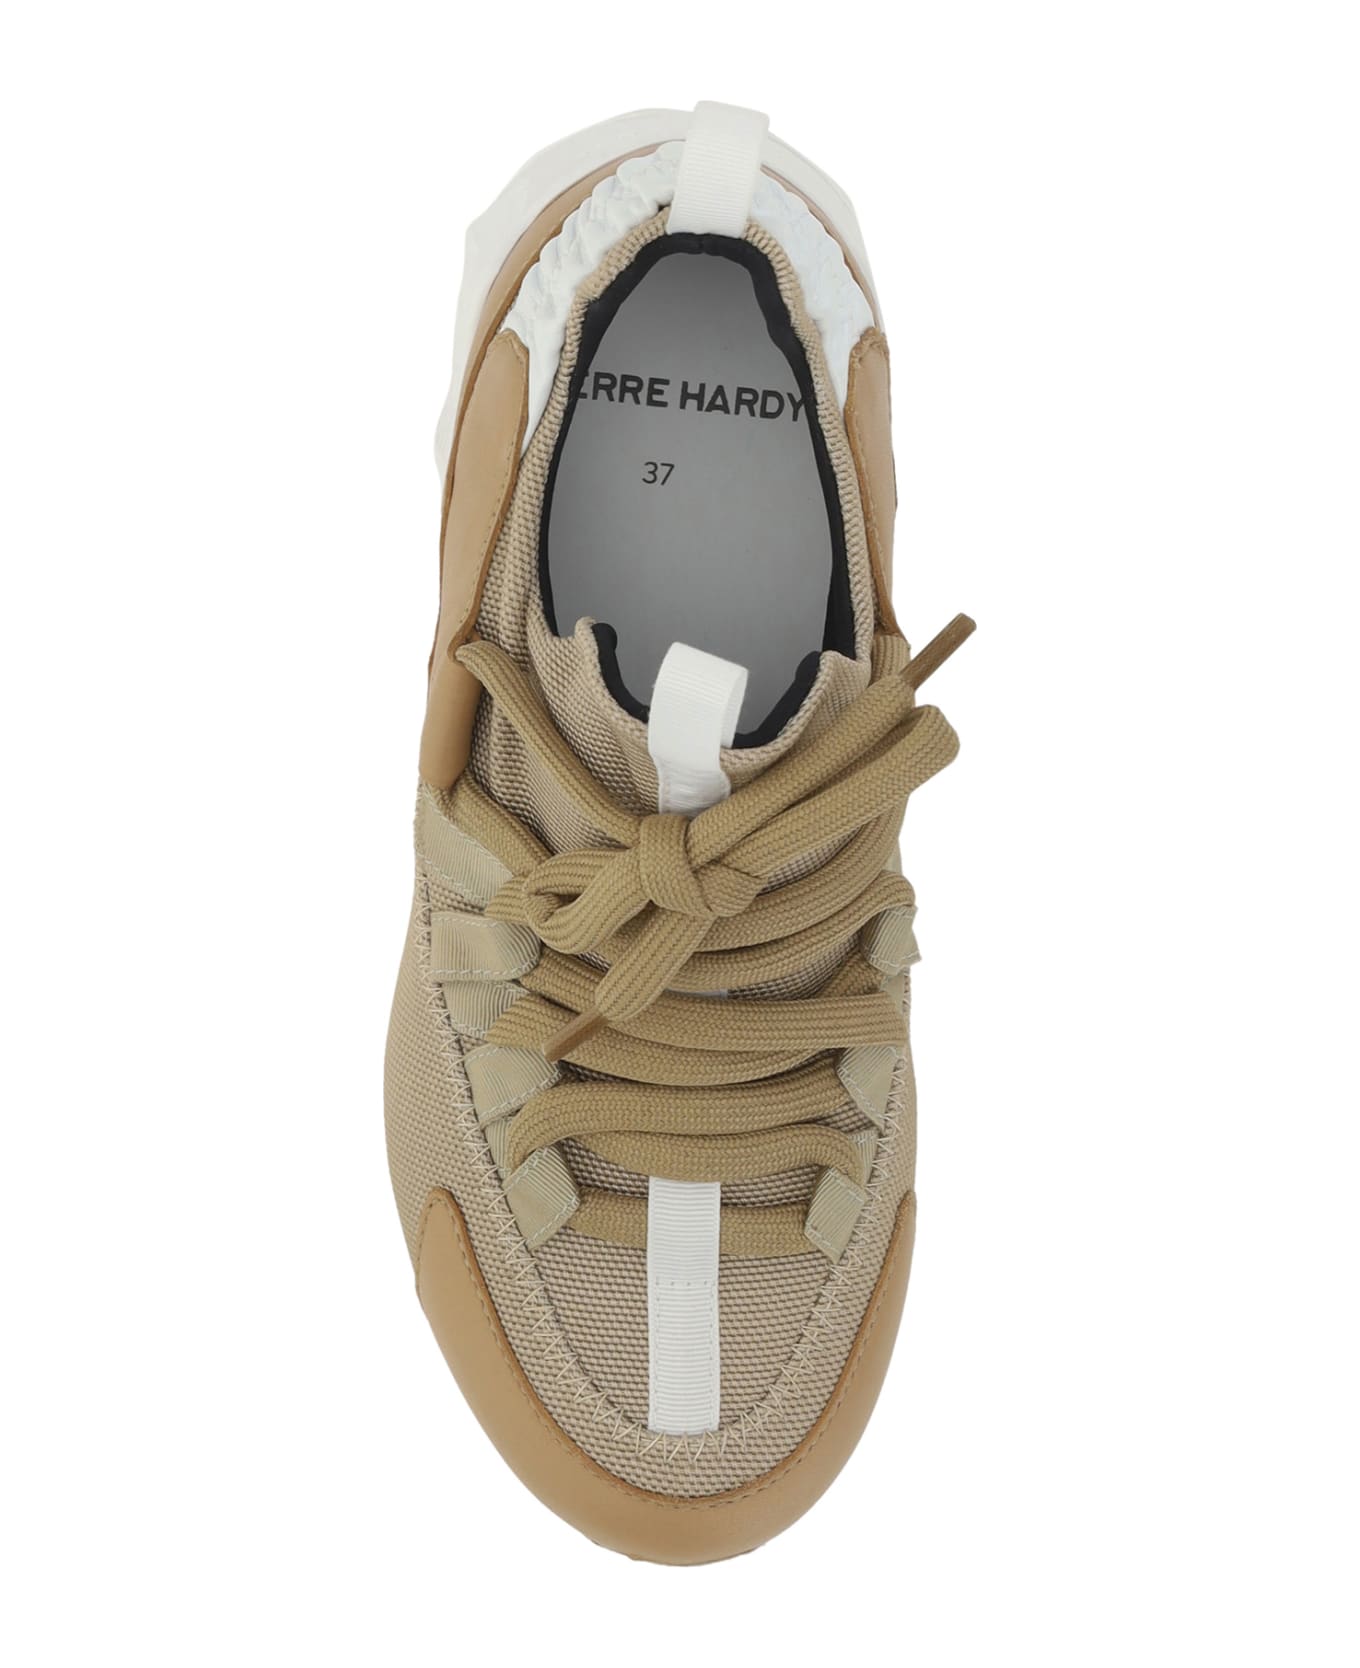 Pierre Hardy Trek Cosmetic Sneakers - Cappuccino/sand/white